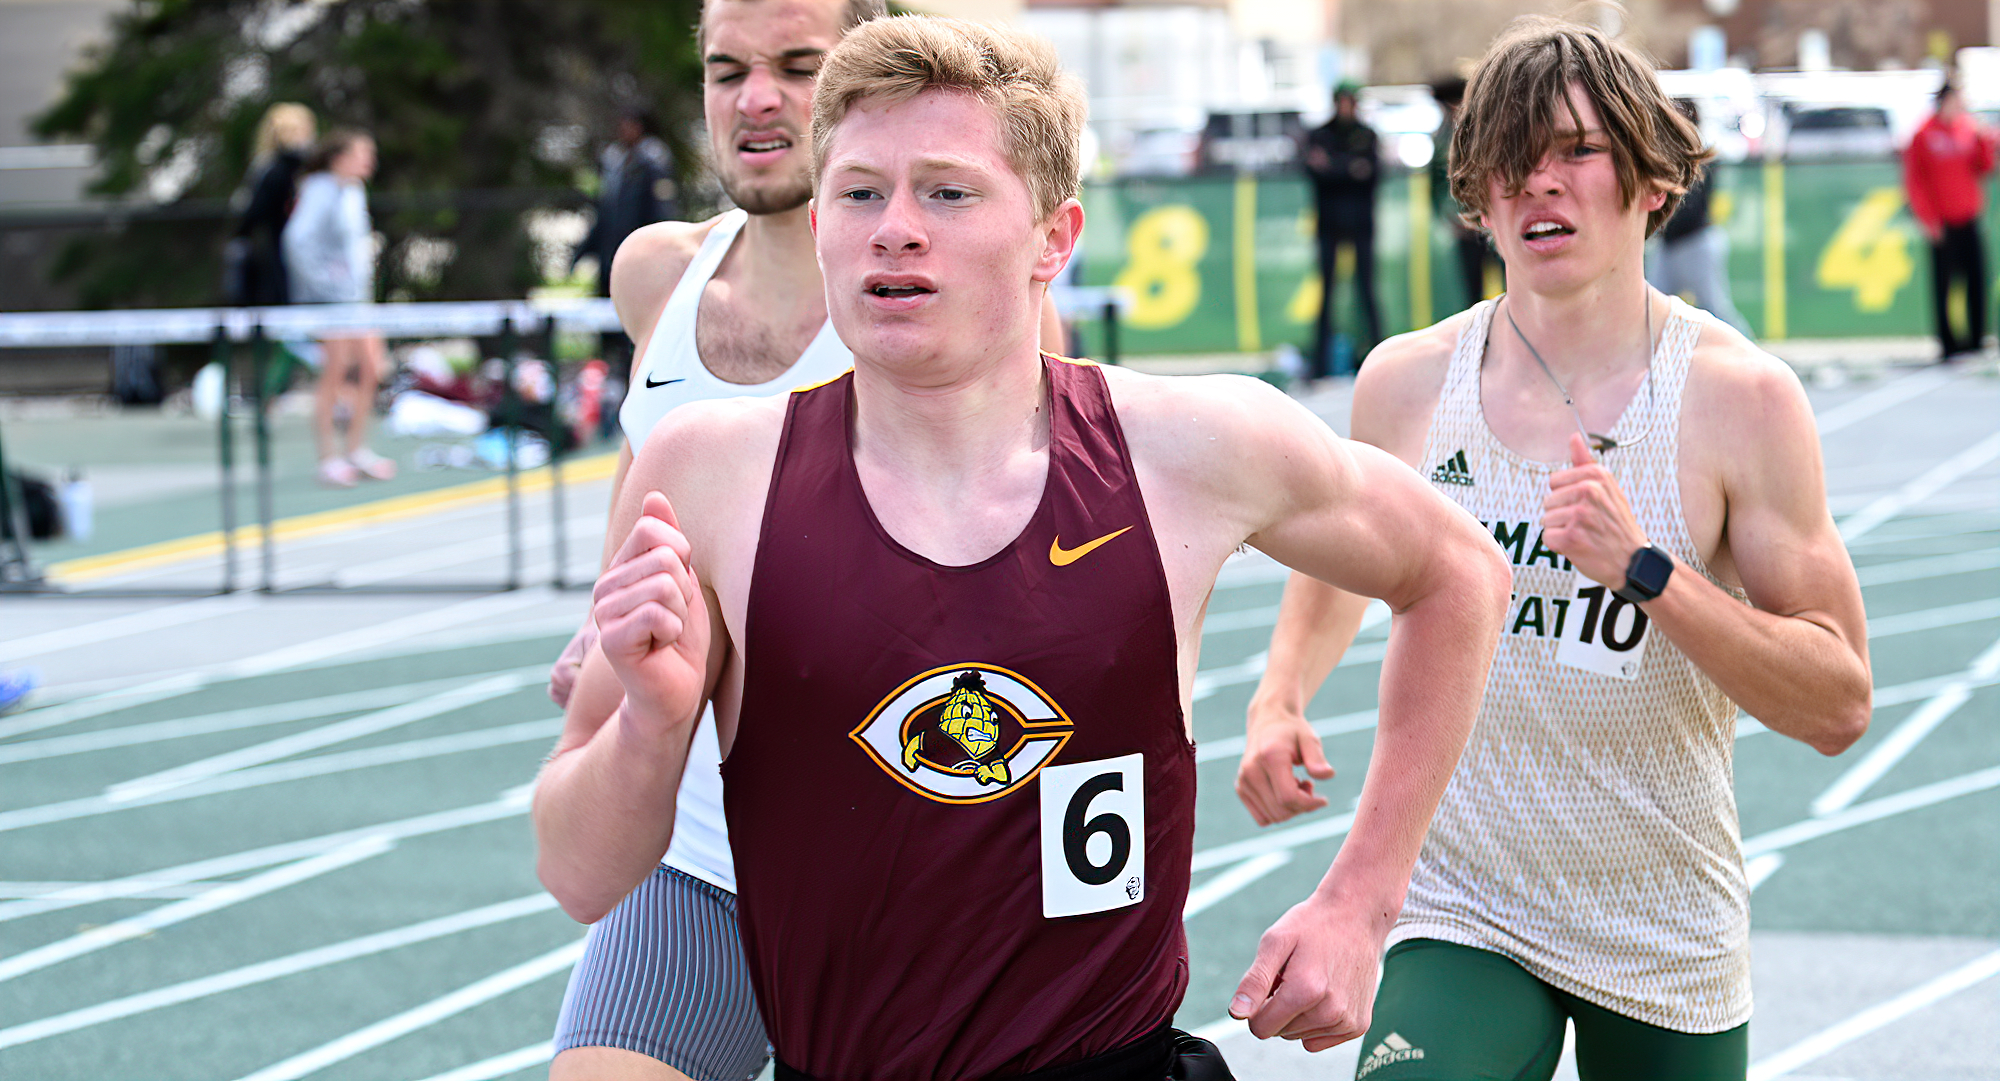 First-year distance runner Brady Goss finished third in the 3000-meter steeplechase after posting the third-fastest time in Cobber history.